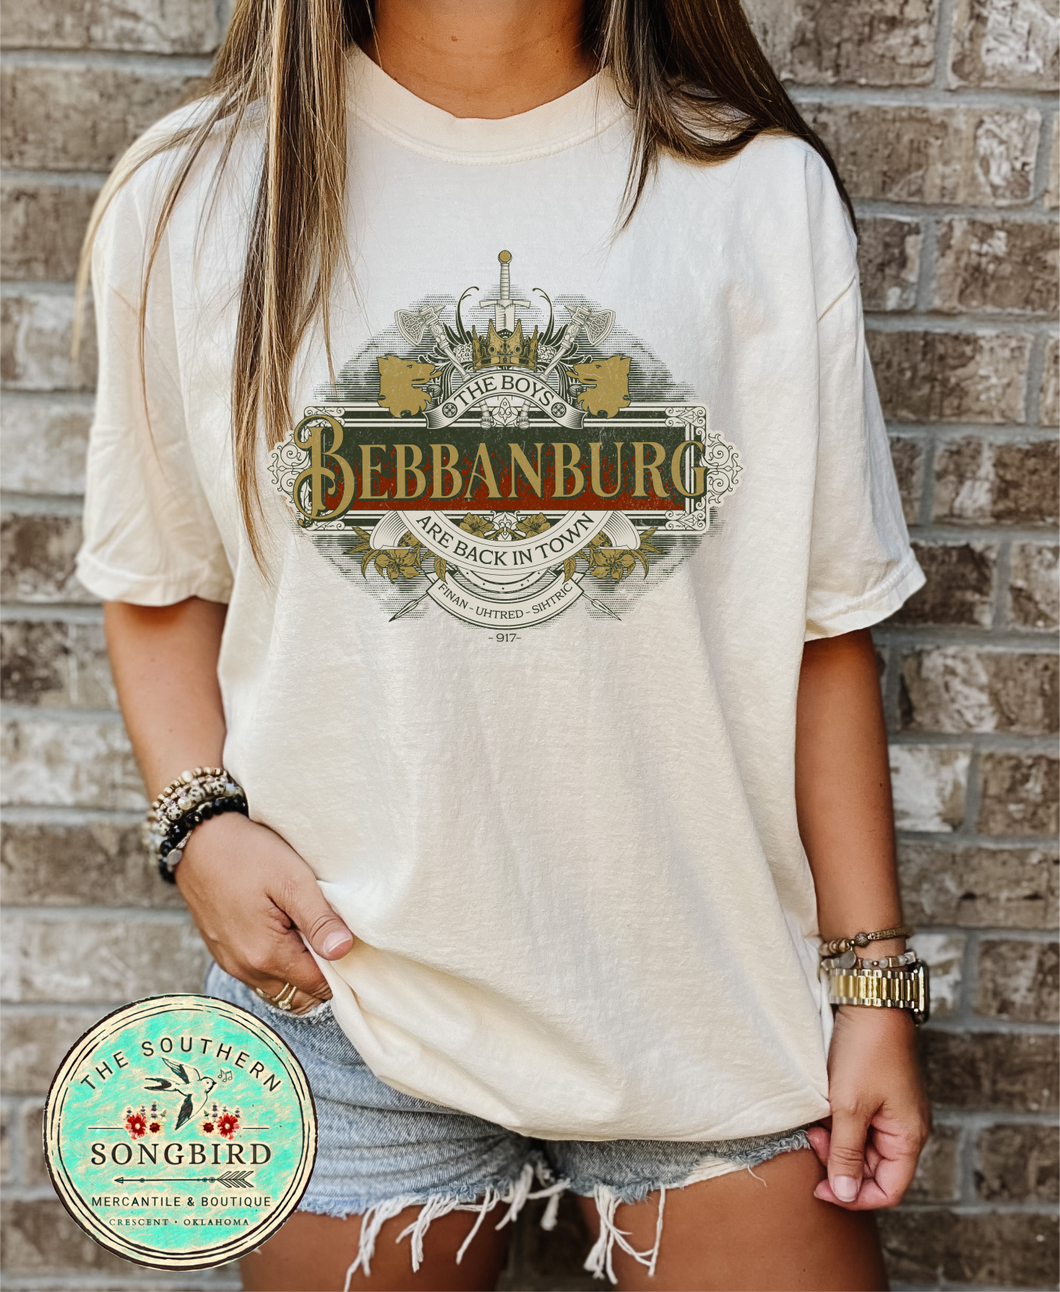 Bebbanburg - The Boys Are Back In Town Graphic T-shirt